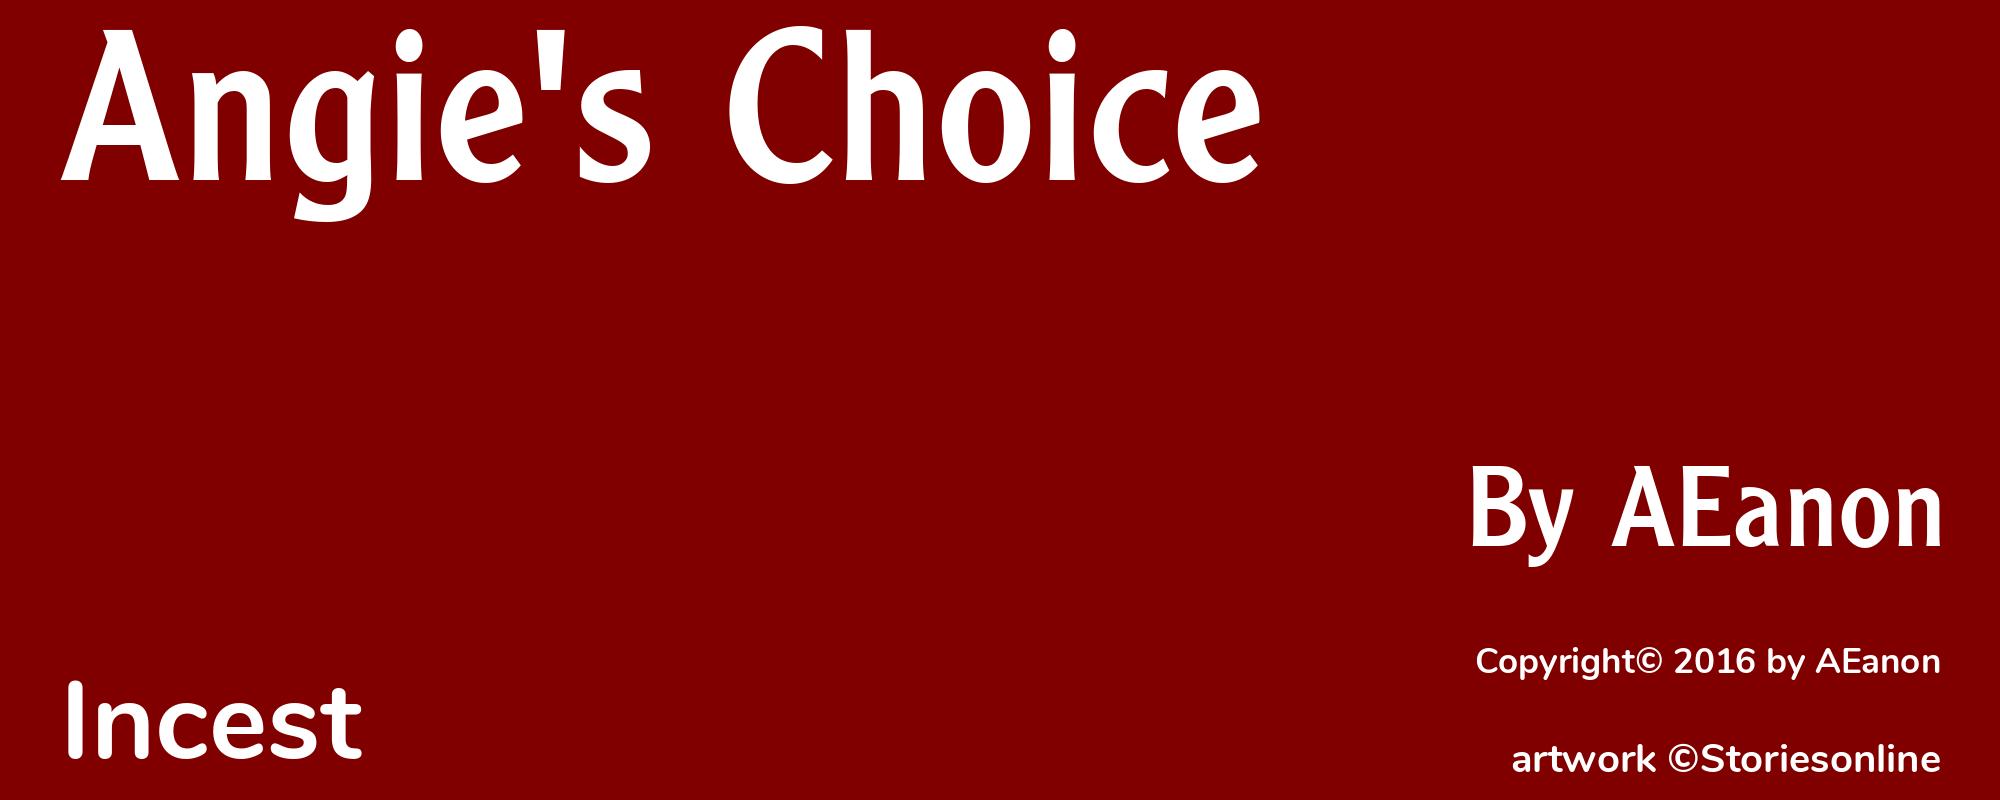 Angie's Choice - Cover